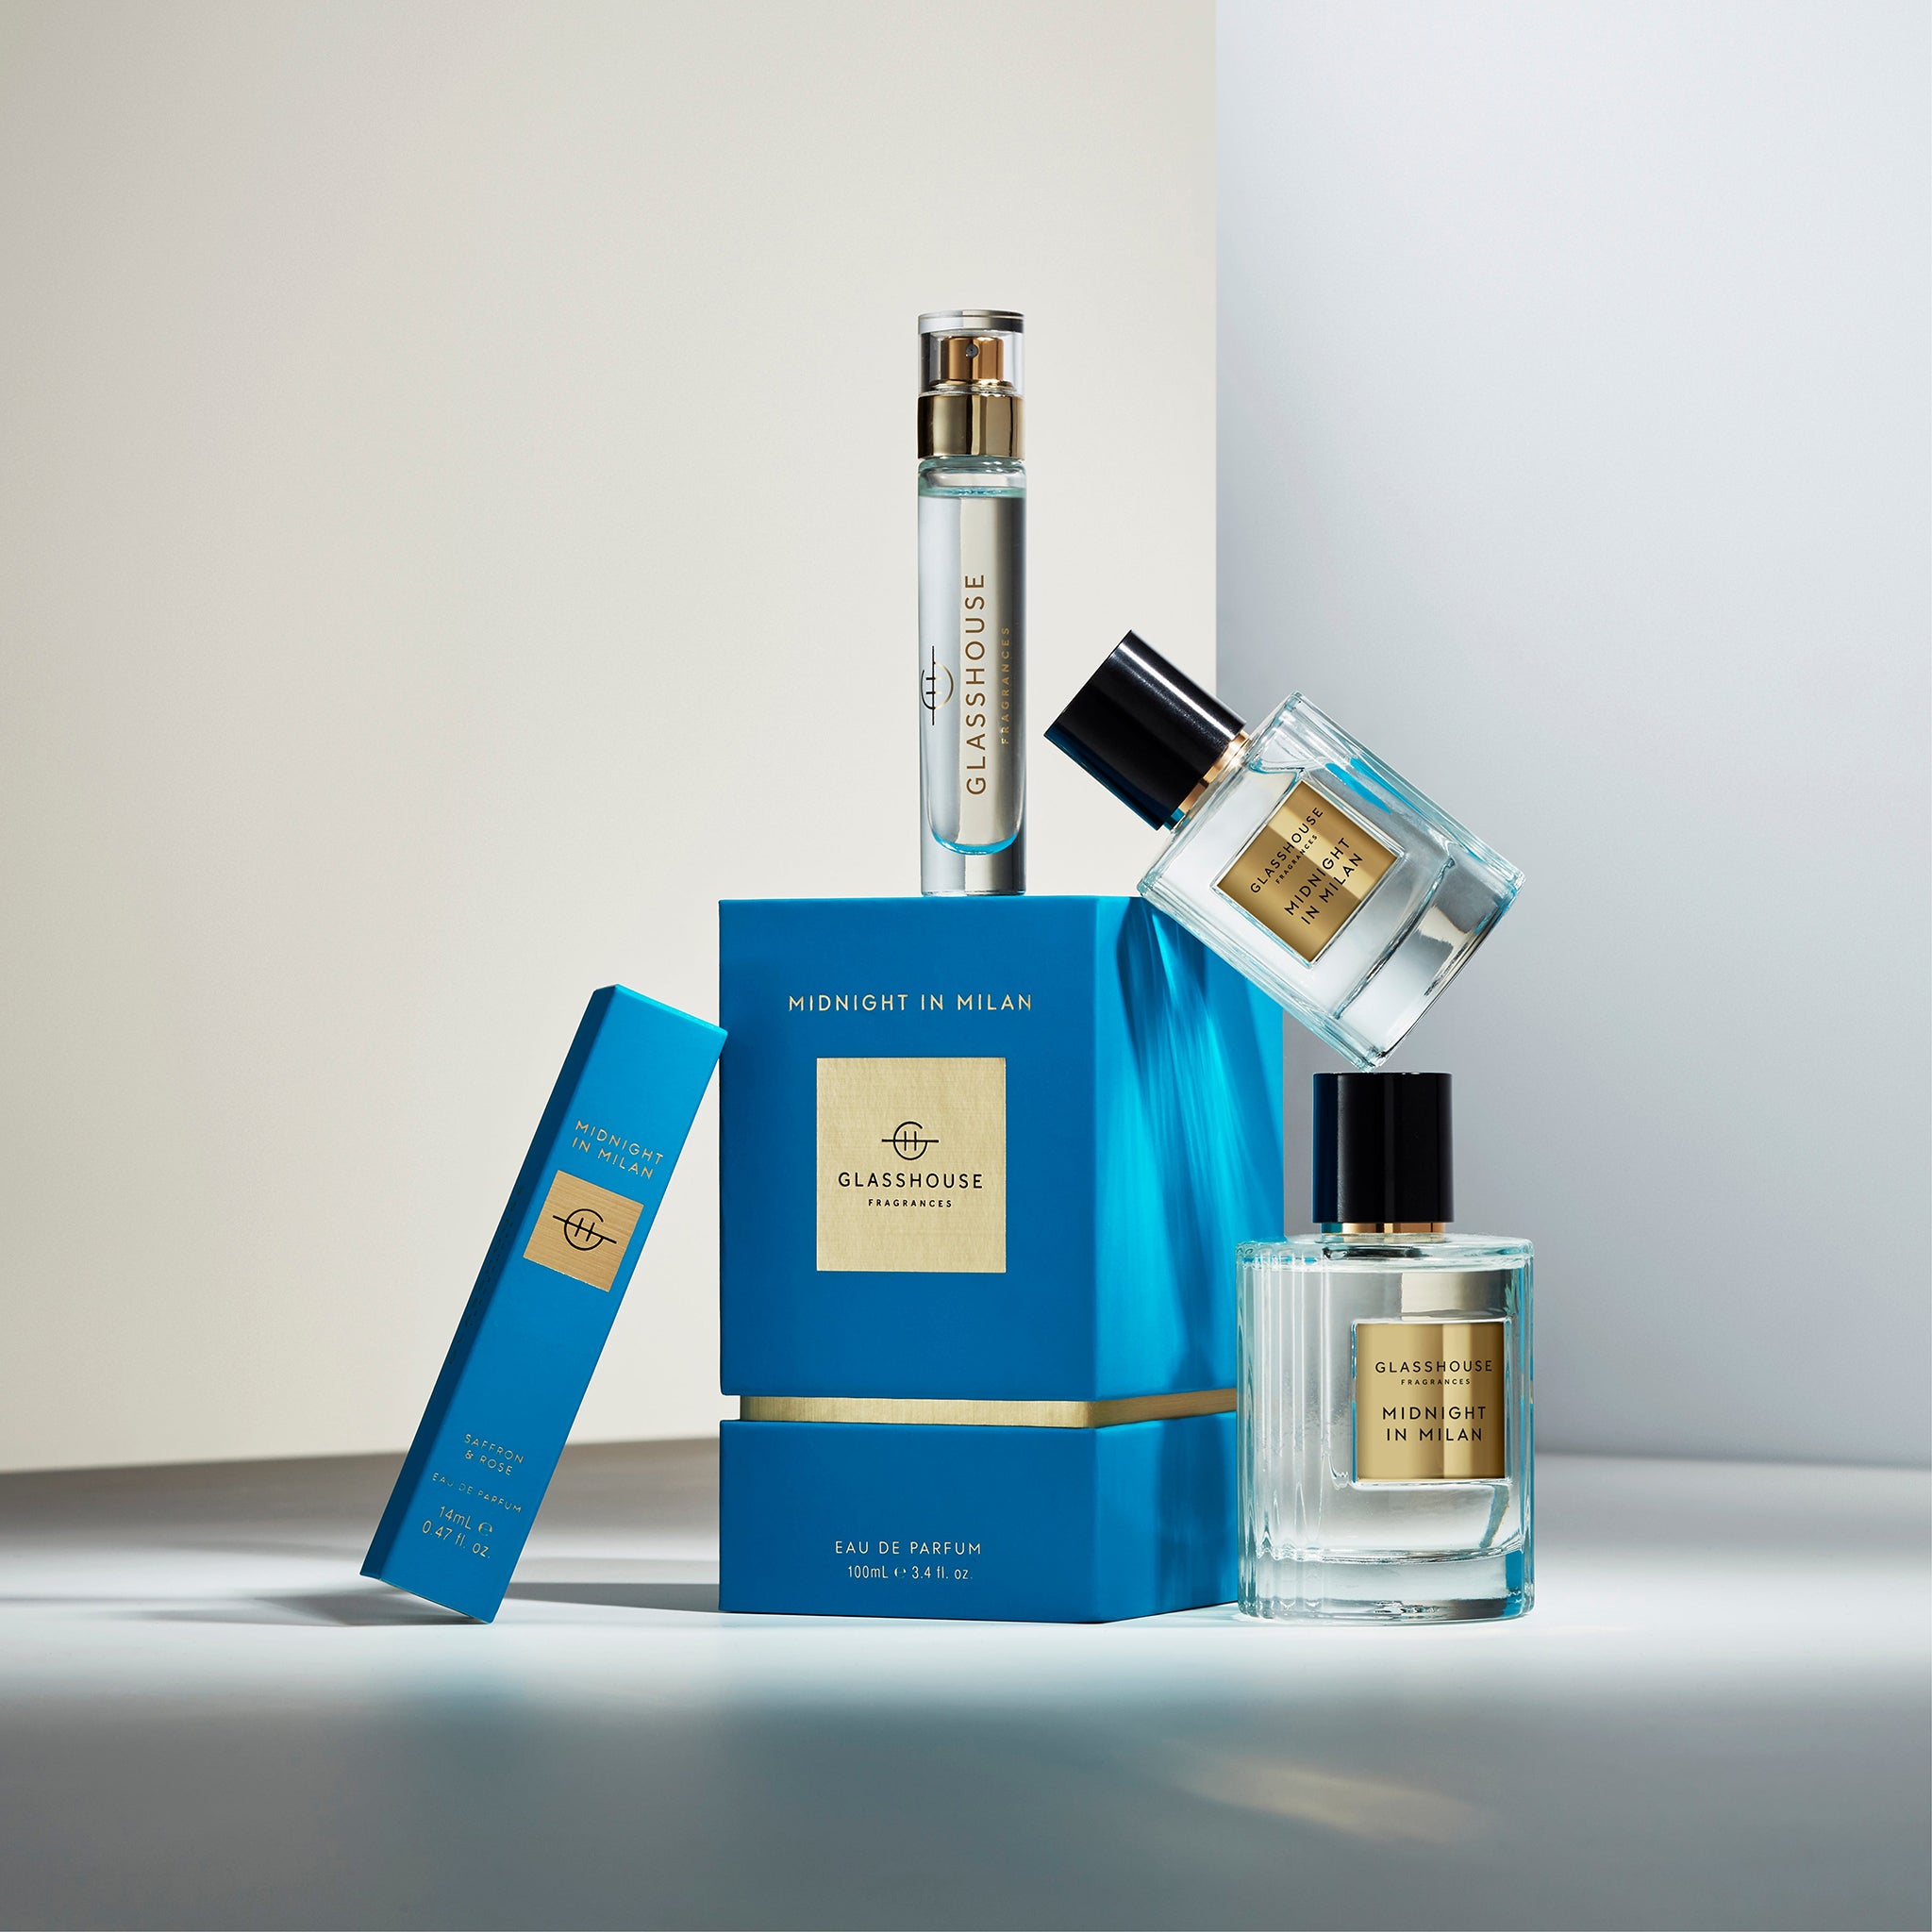 Glasshouse Fragrances Midnight in Milan Saffron and Rose - various sizes  of Eau de Parfum and boxes arranged in a tower